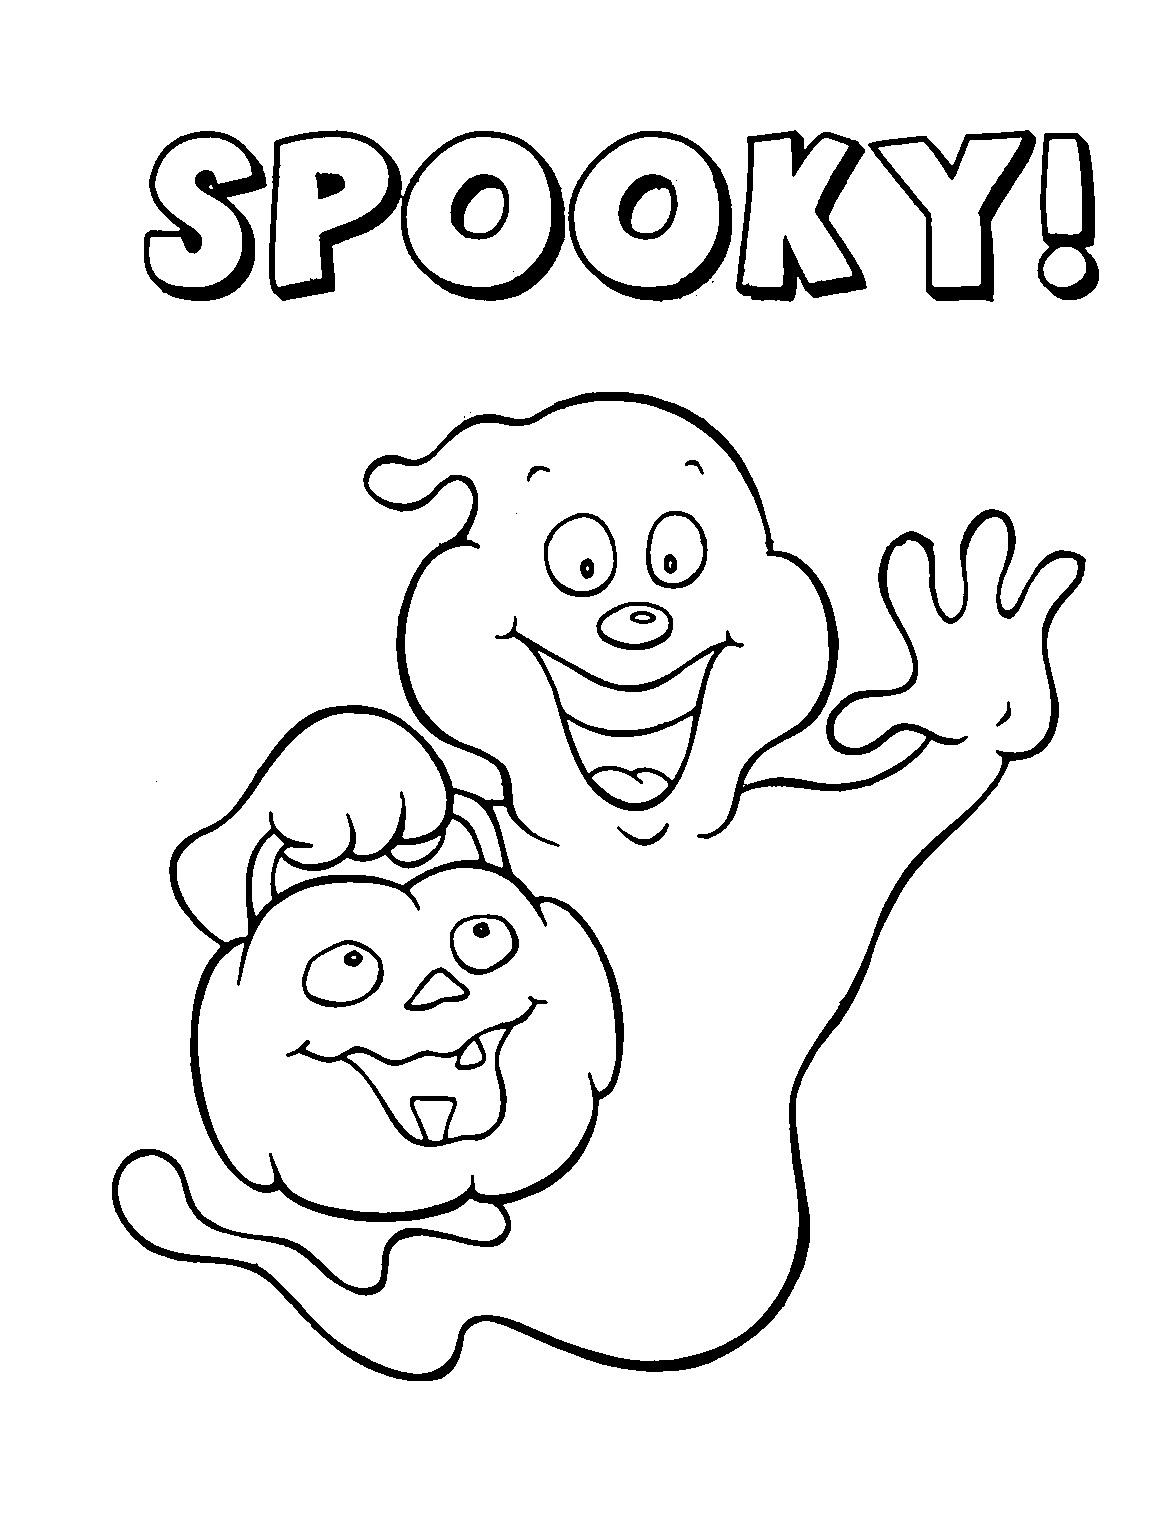 Toddler Halloween Coloring Pages Printable
 50 Free Printable Halloween Coloring Pages For Kids